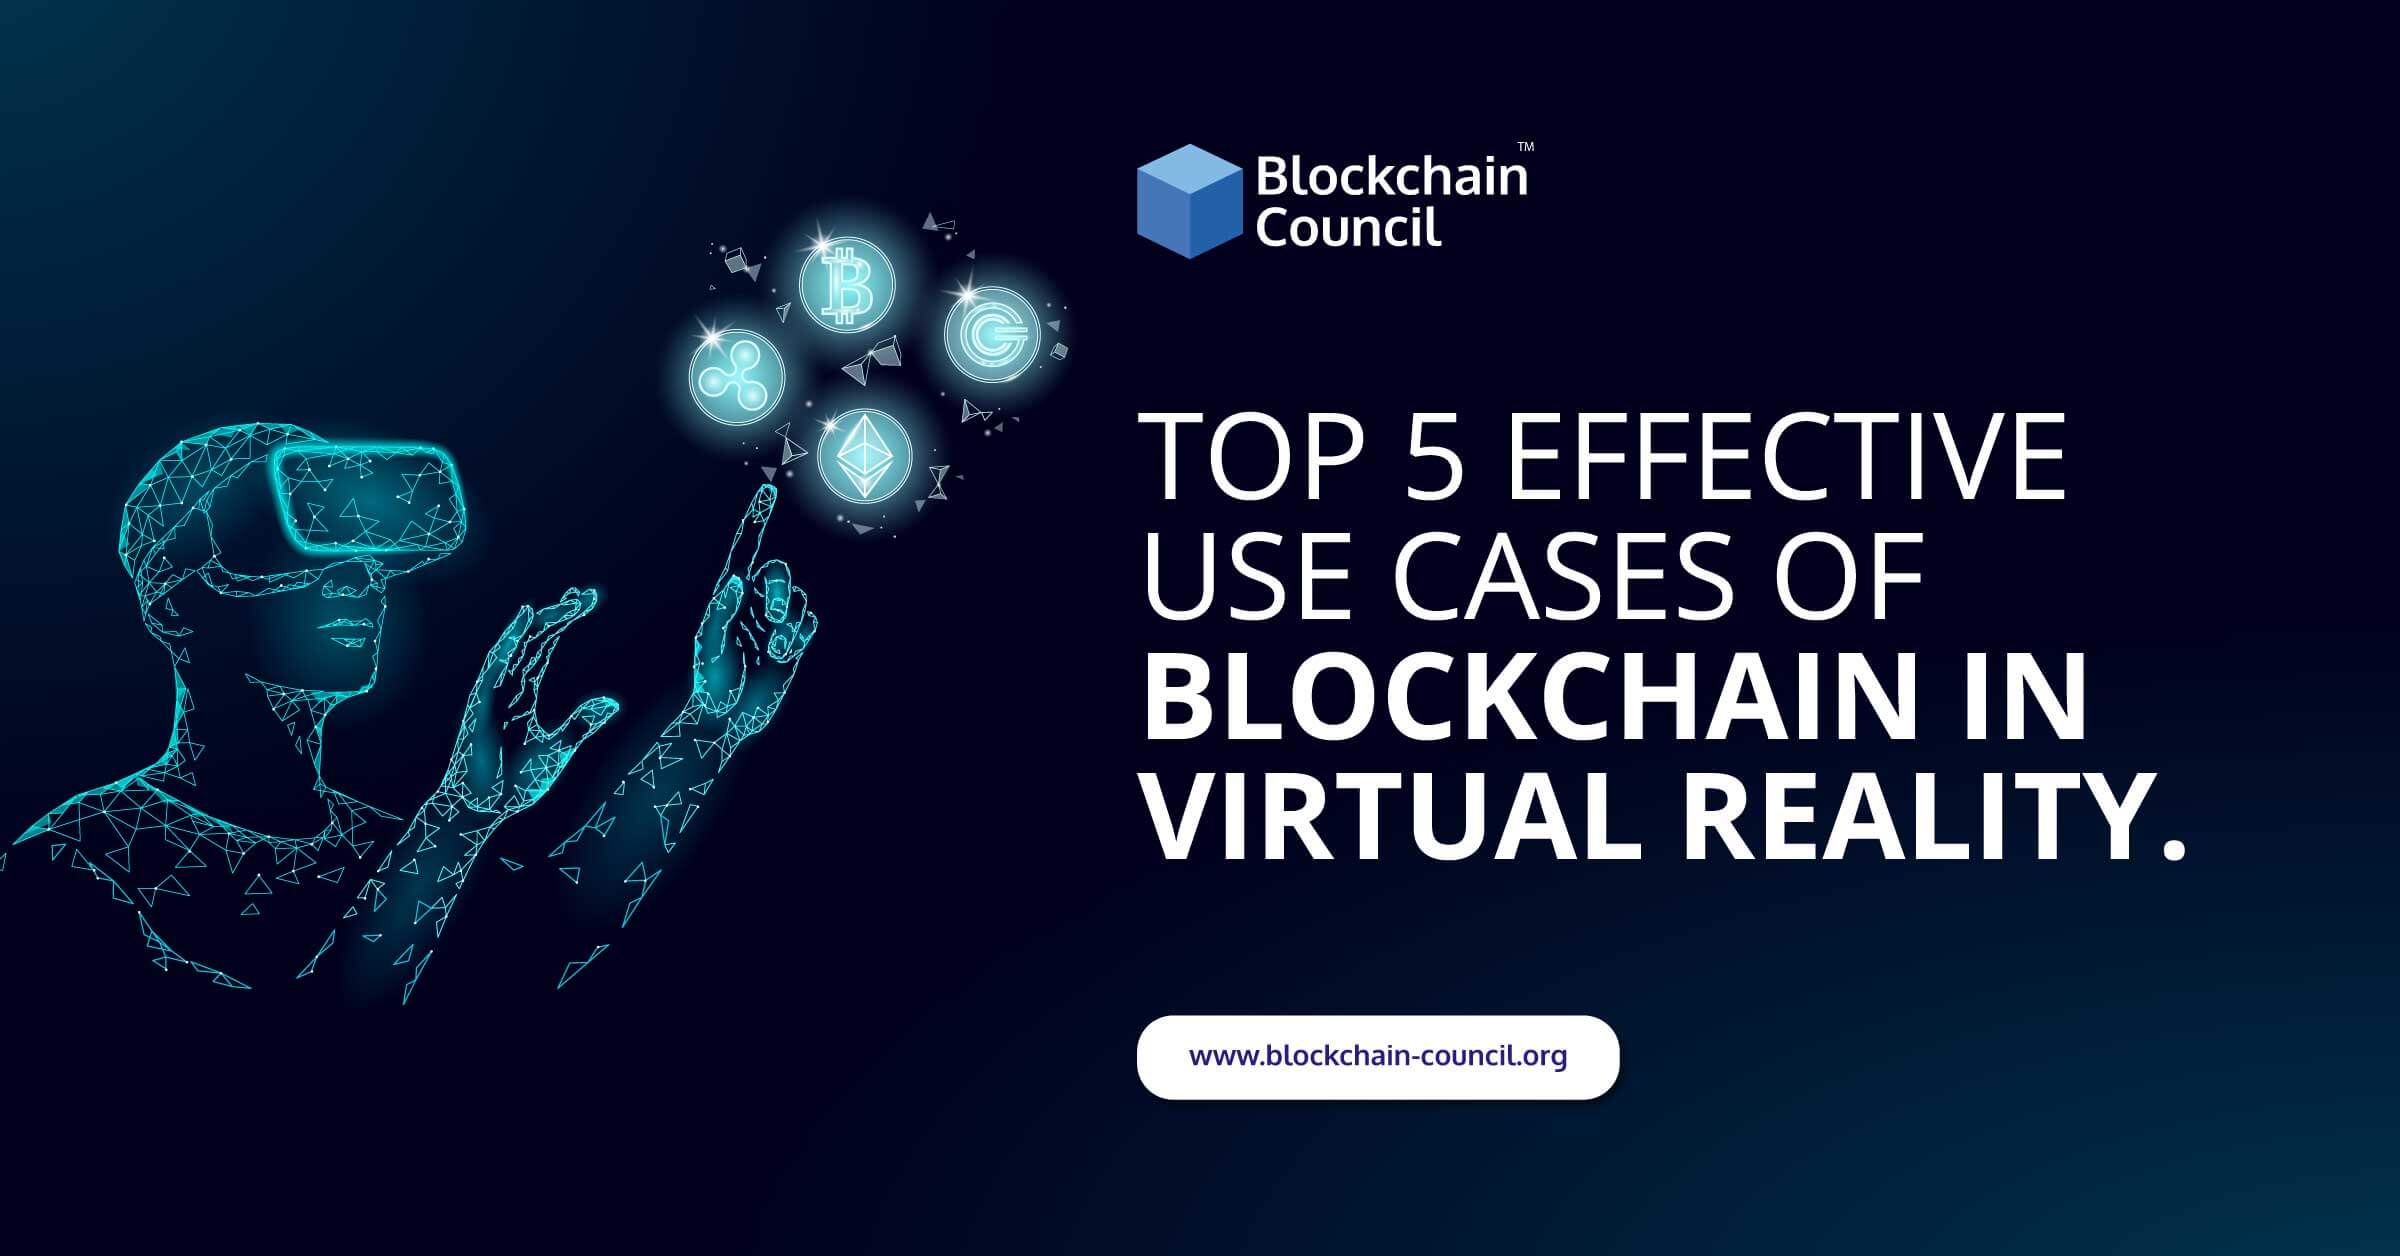 Top-5-Effective-Use-Cases-of-Blockchain-in-Virtual-Reality